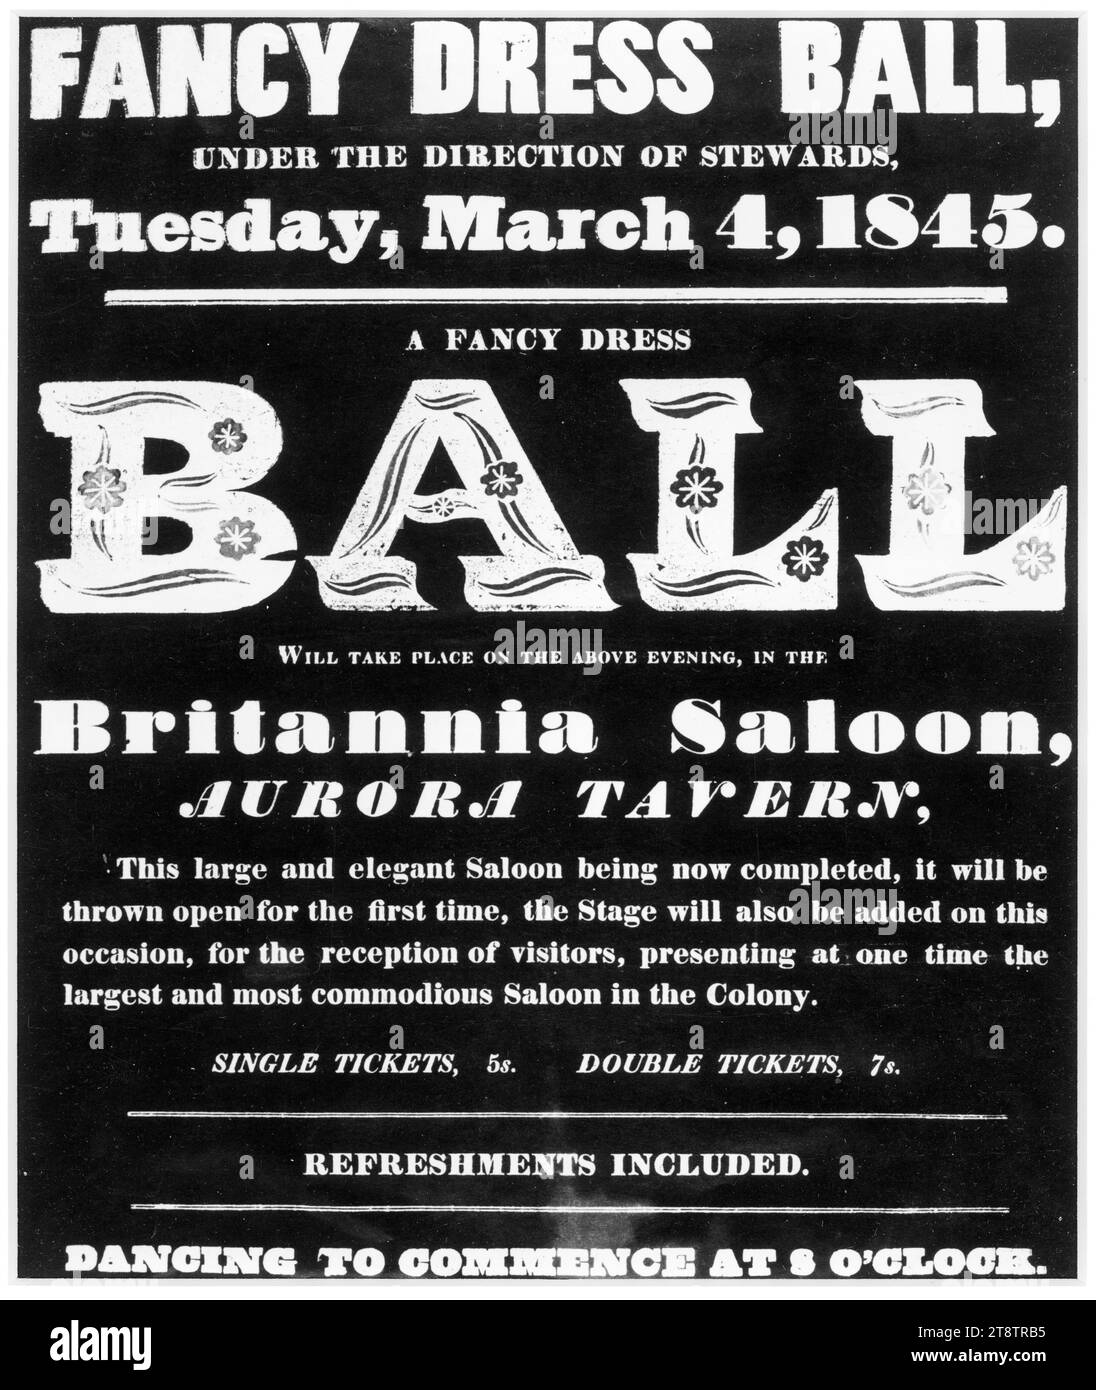 Fancy dress ball, under the direction of stewards, Tuesday, March 4, 1845. A fancy dress BALL will take place on the above evening, in the Britannia Saloon, Aurora Tavern.. Dancing to commence at 8 o'clock, A negative reproduction of a poster advertising a ball in the Britannia Saloon, which was just completed, and now 'thrown open for the first time'. Shows an arrangement of text, white on black Stock Photo